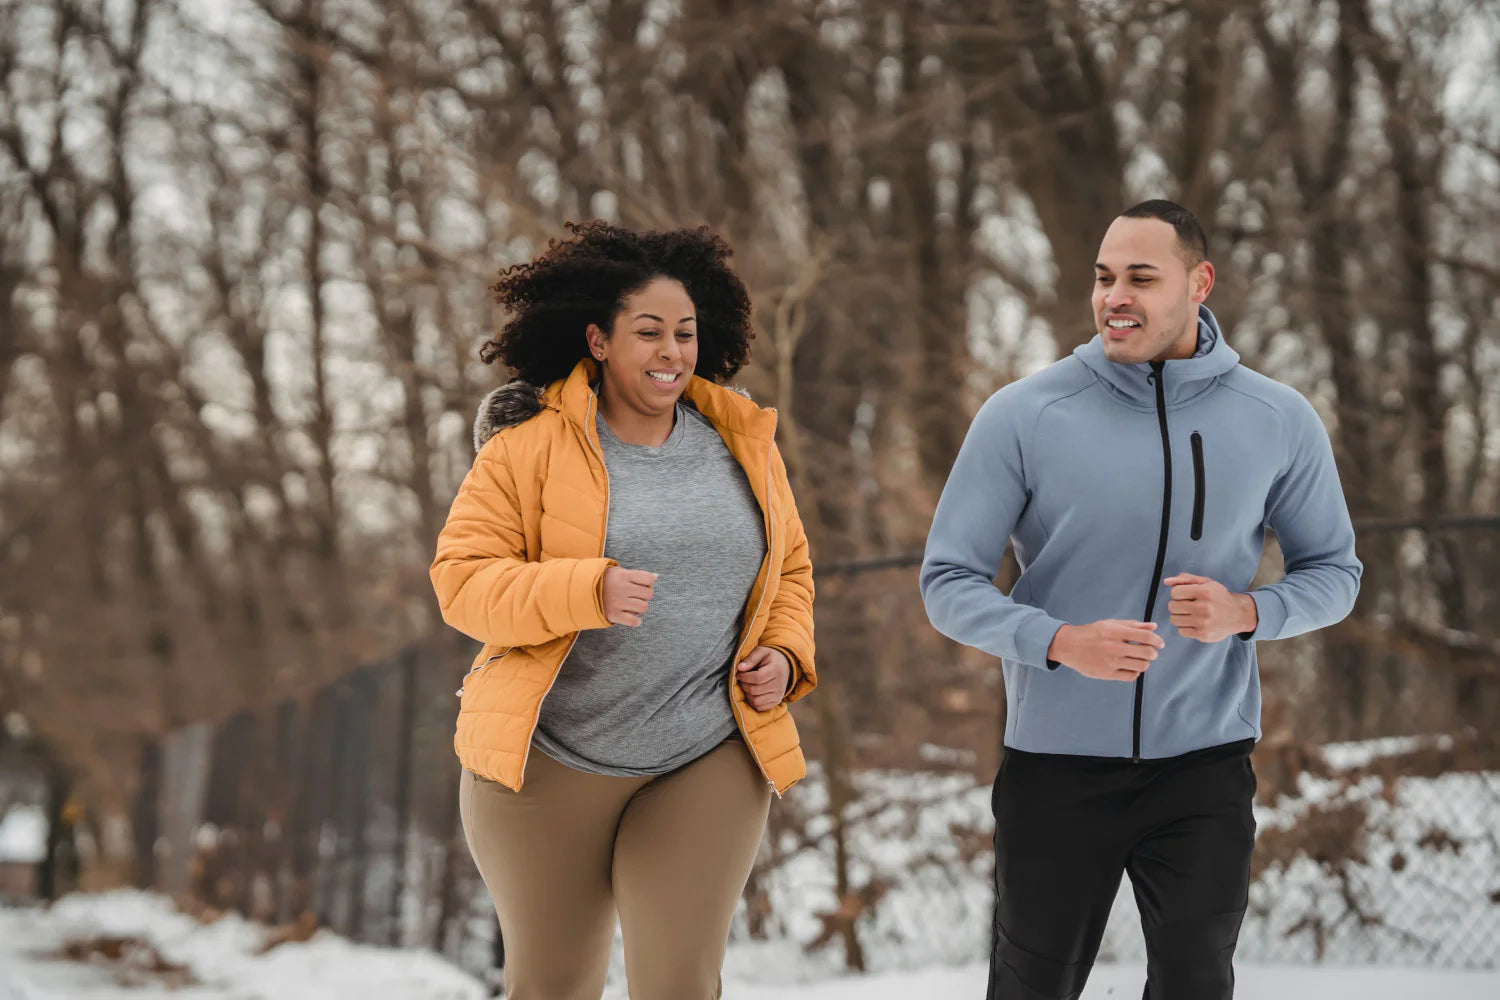 6 Tips for Boosting Exercise Motivation in the Cold, Dark Winter Months